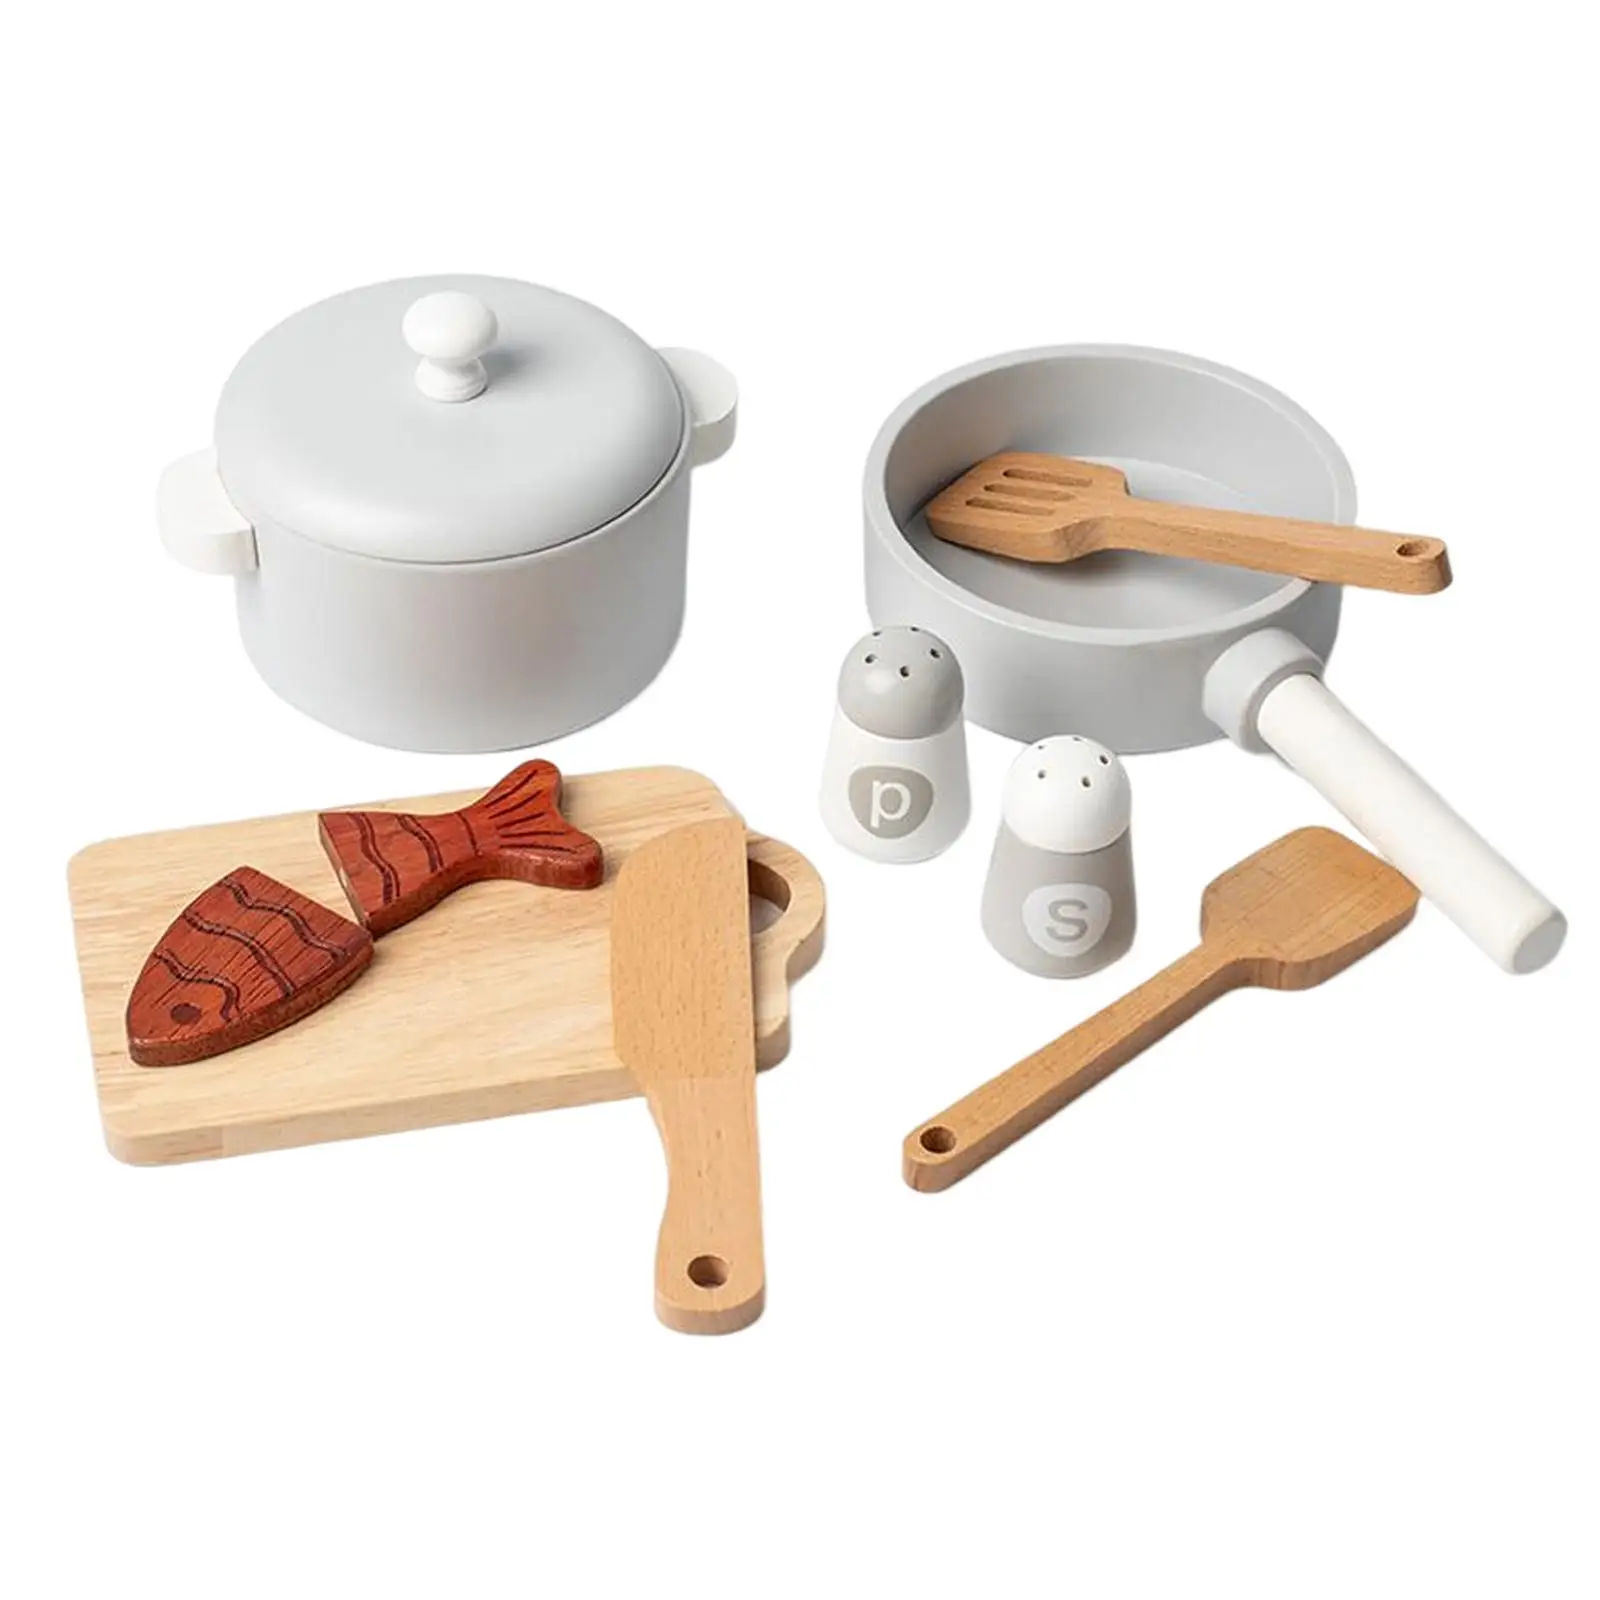 kitchen Set Mini Wooden Toy Pretend Play Accessories Cookware Set for Cooking